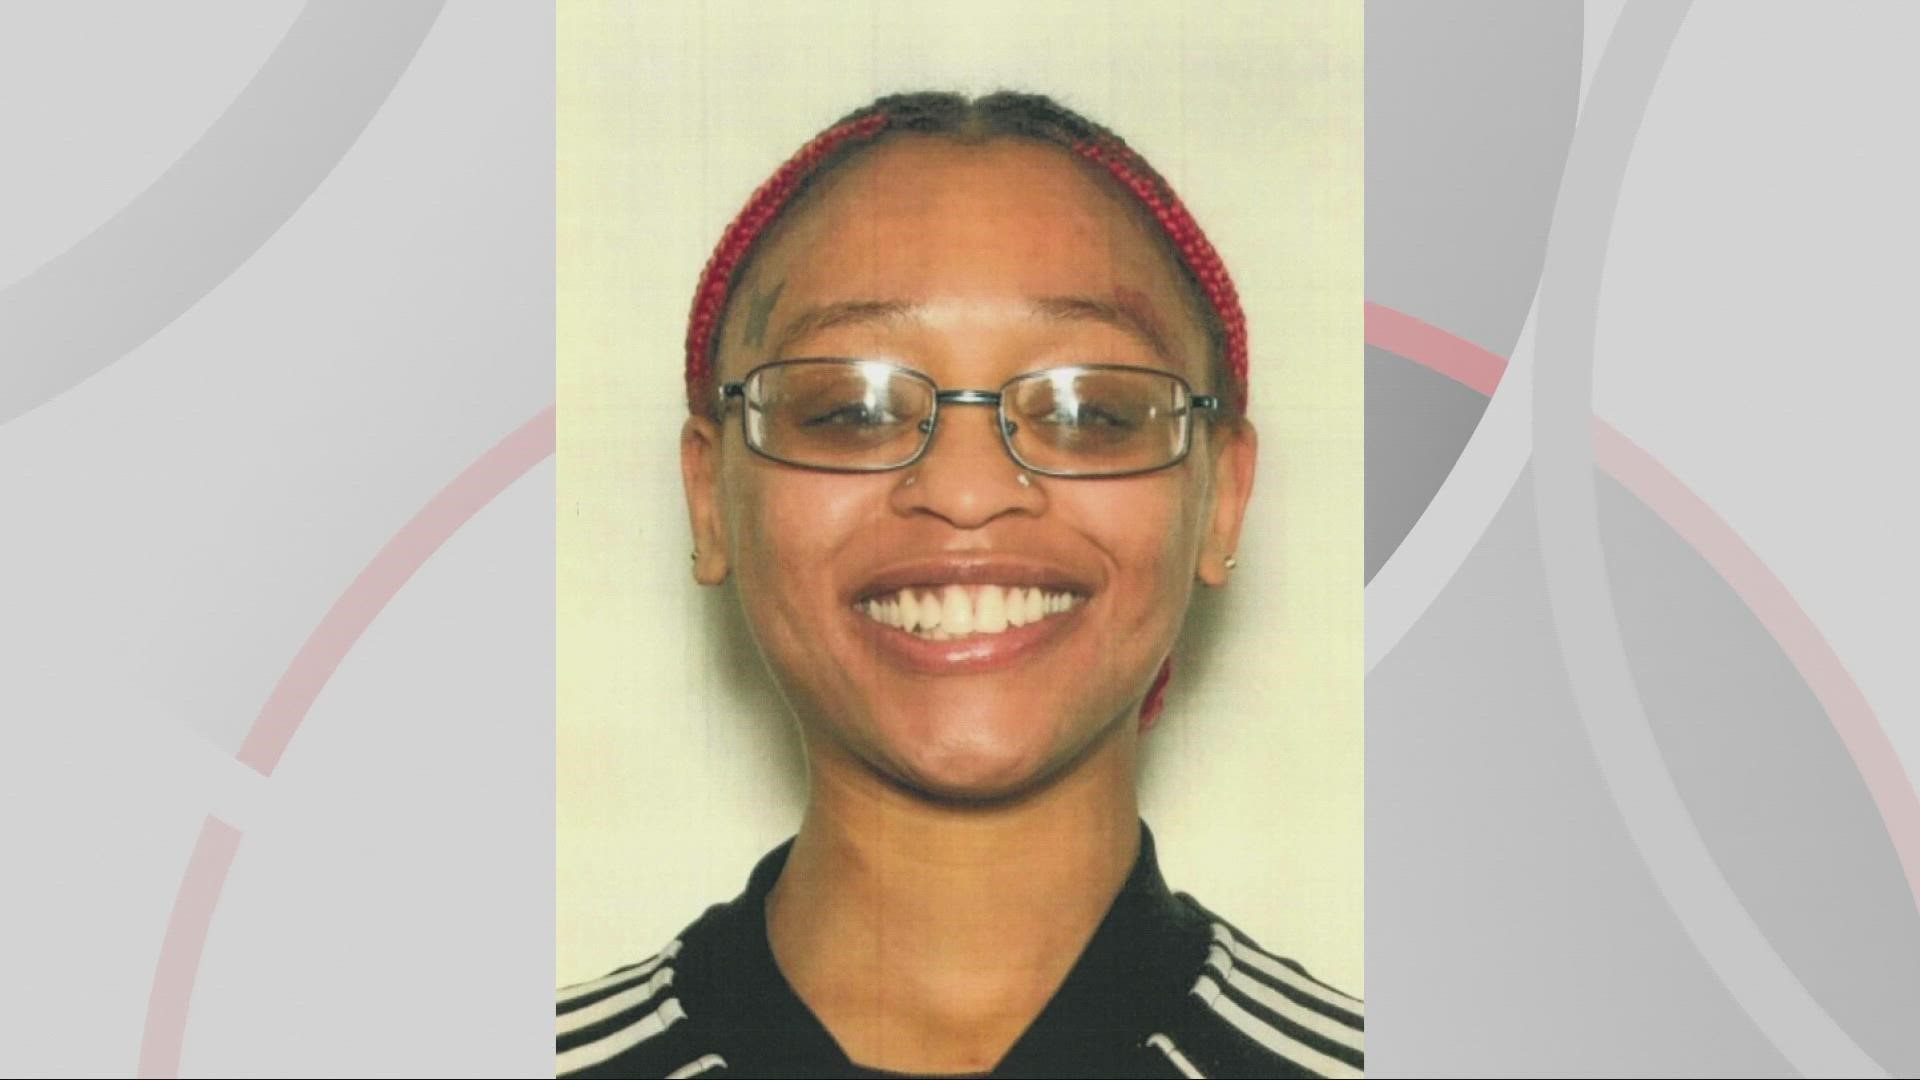 23-year-old Adrianna Taylor from Cleveland was found dead in Wilkinsburg, Pennsylvania.